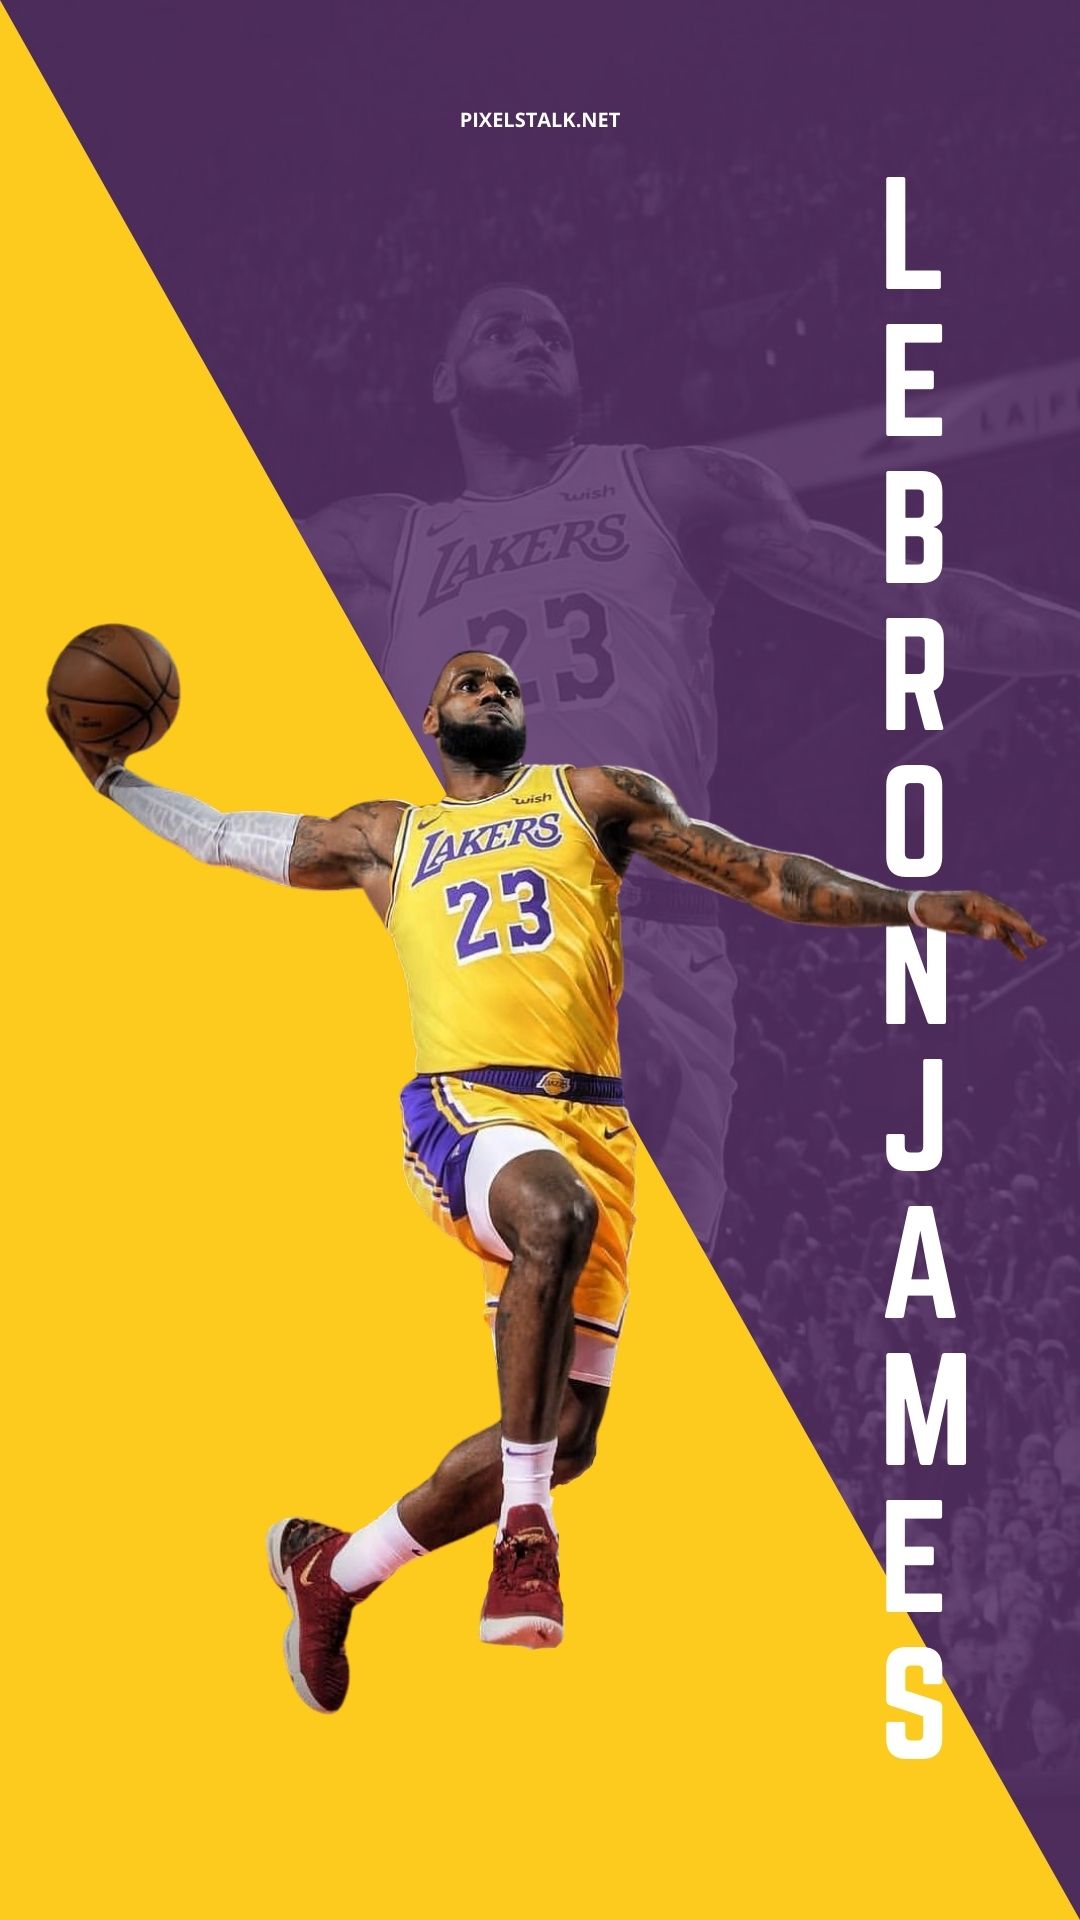 Lebron James Mvp Wallpapers 2018 71 images